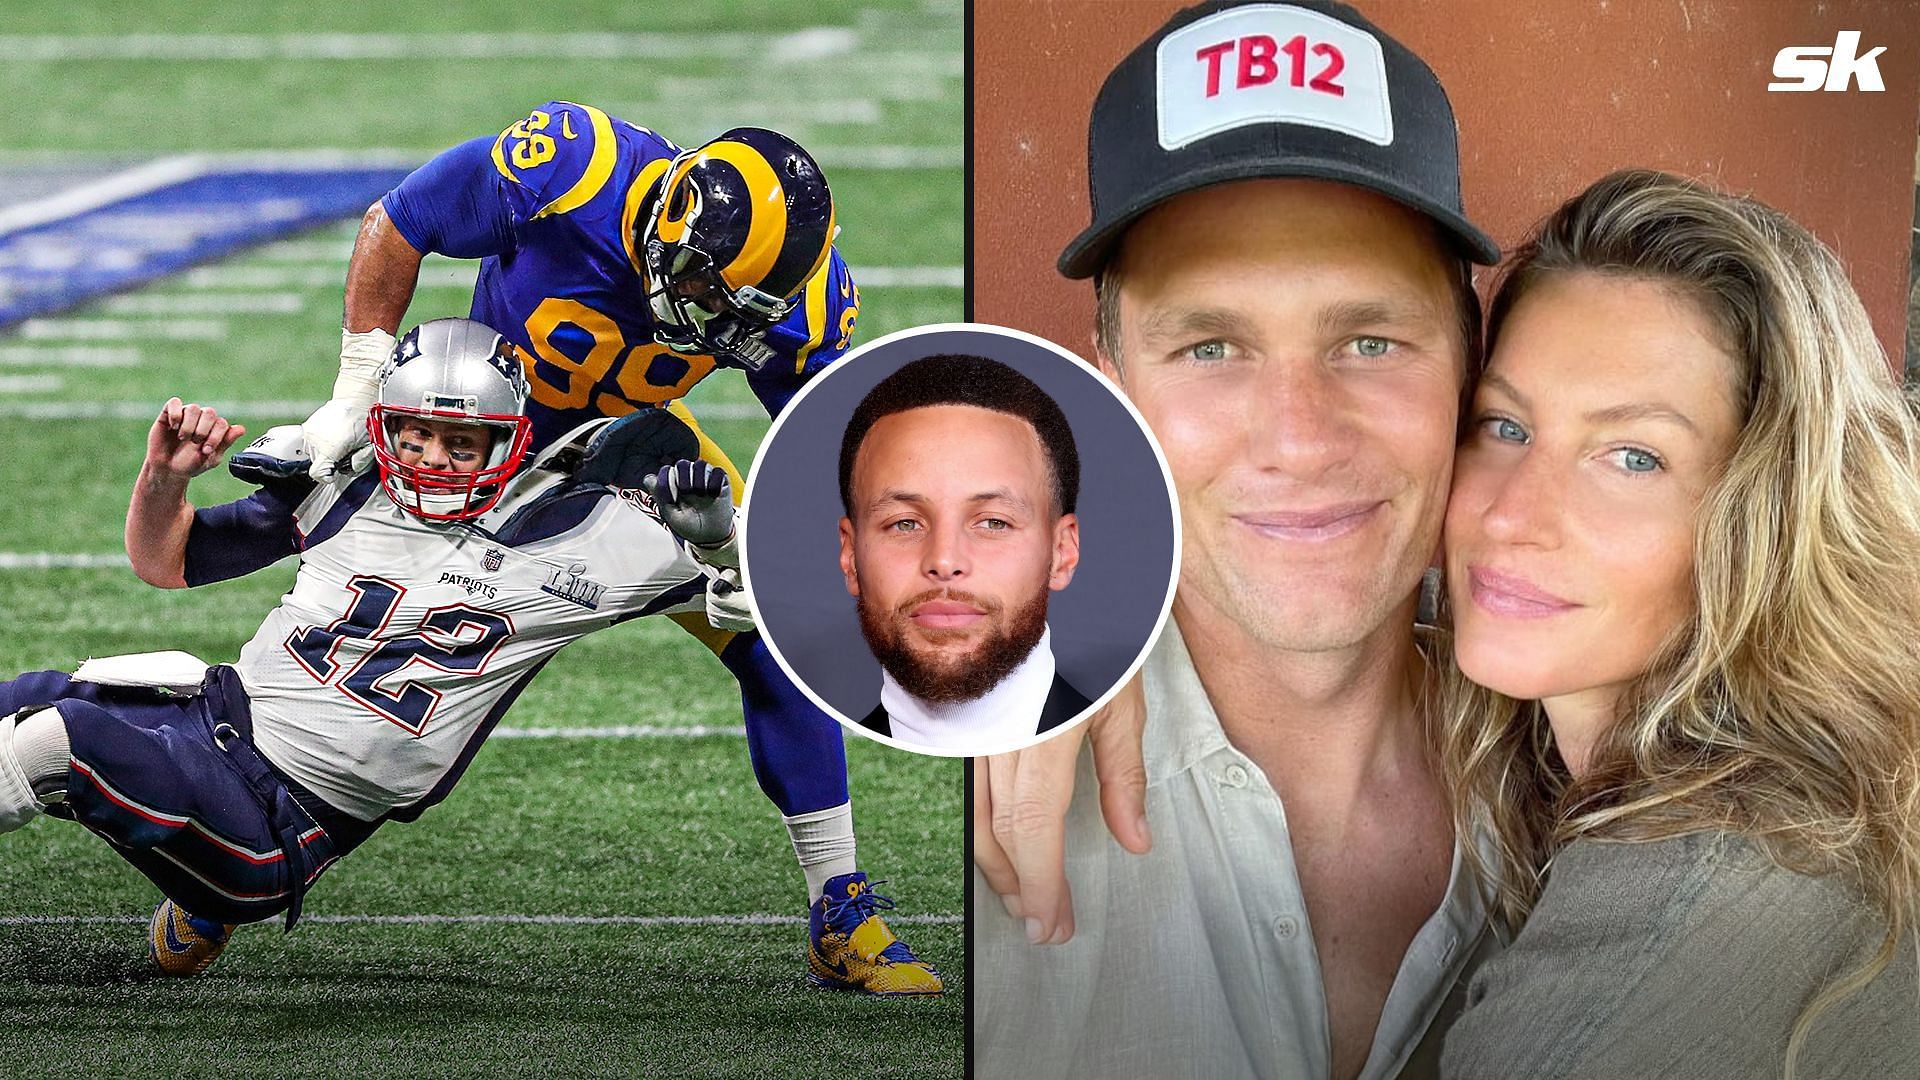 Steph Curry (inset) roasted Tom Brady, stating that he&#039;d rather get hit by Aaron Donald than hang out with his wife, Gisele